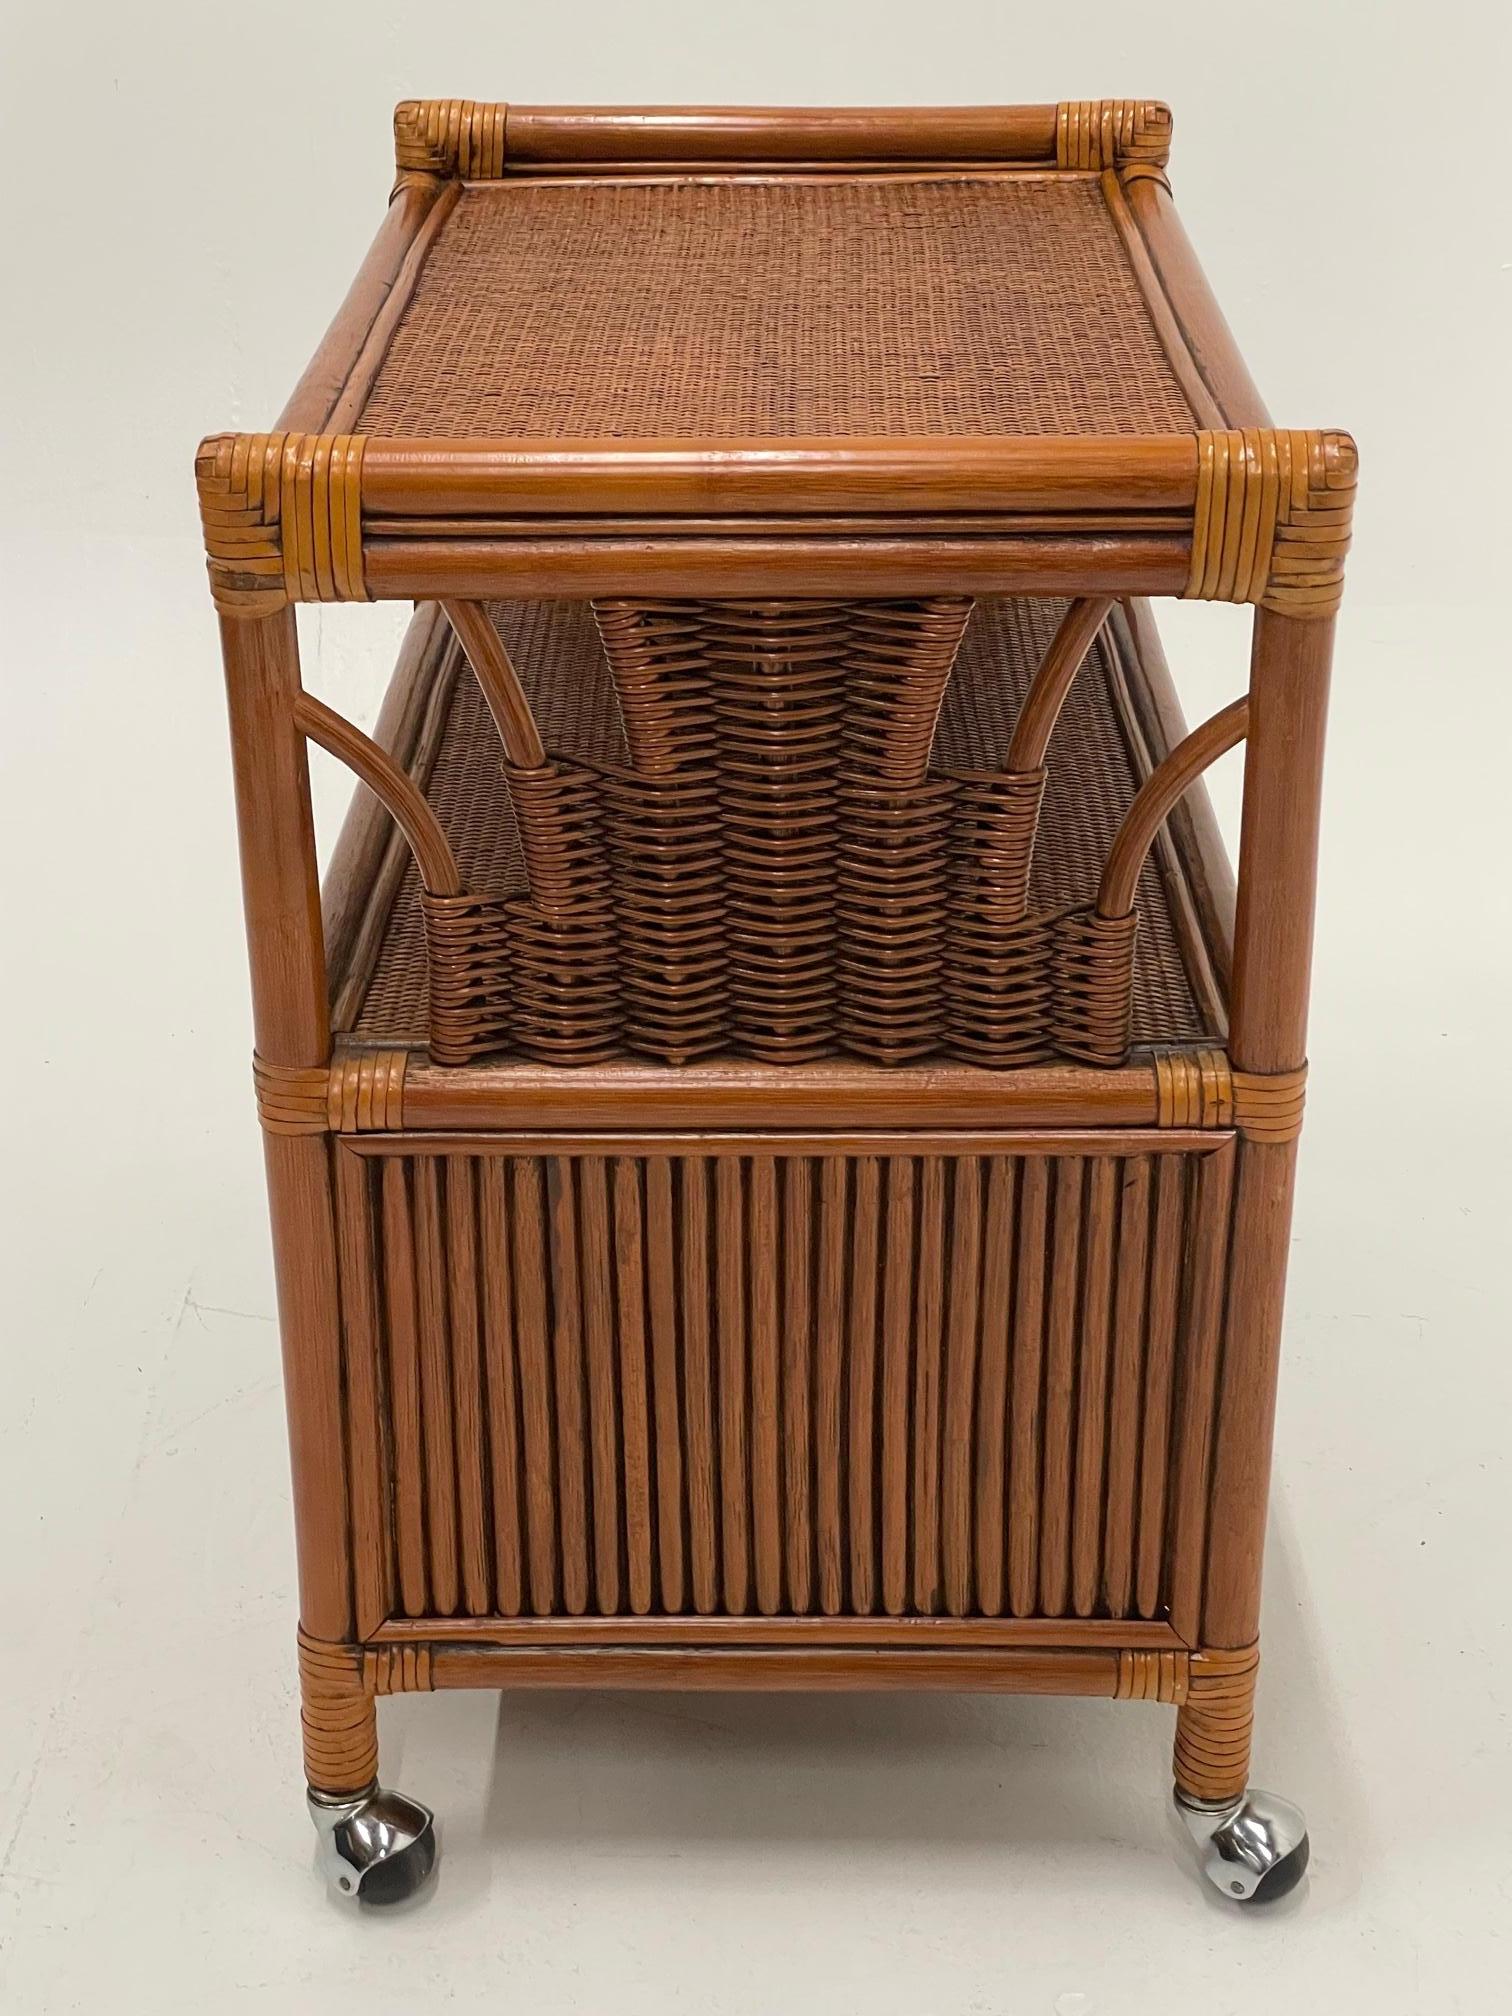 A multi functional handsome rattan server cabinet on brass casters having two tiers, lower doors that open to storage, handsome leather lace wraps, and beautiful McGuire craftsmanship.